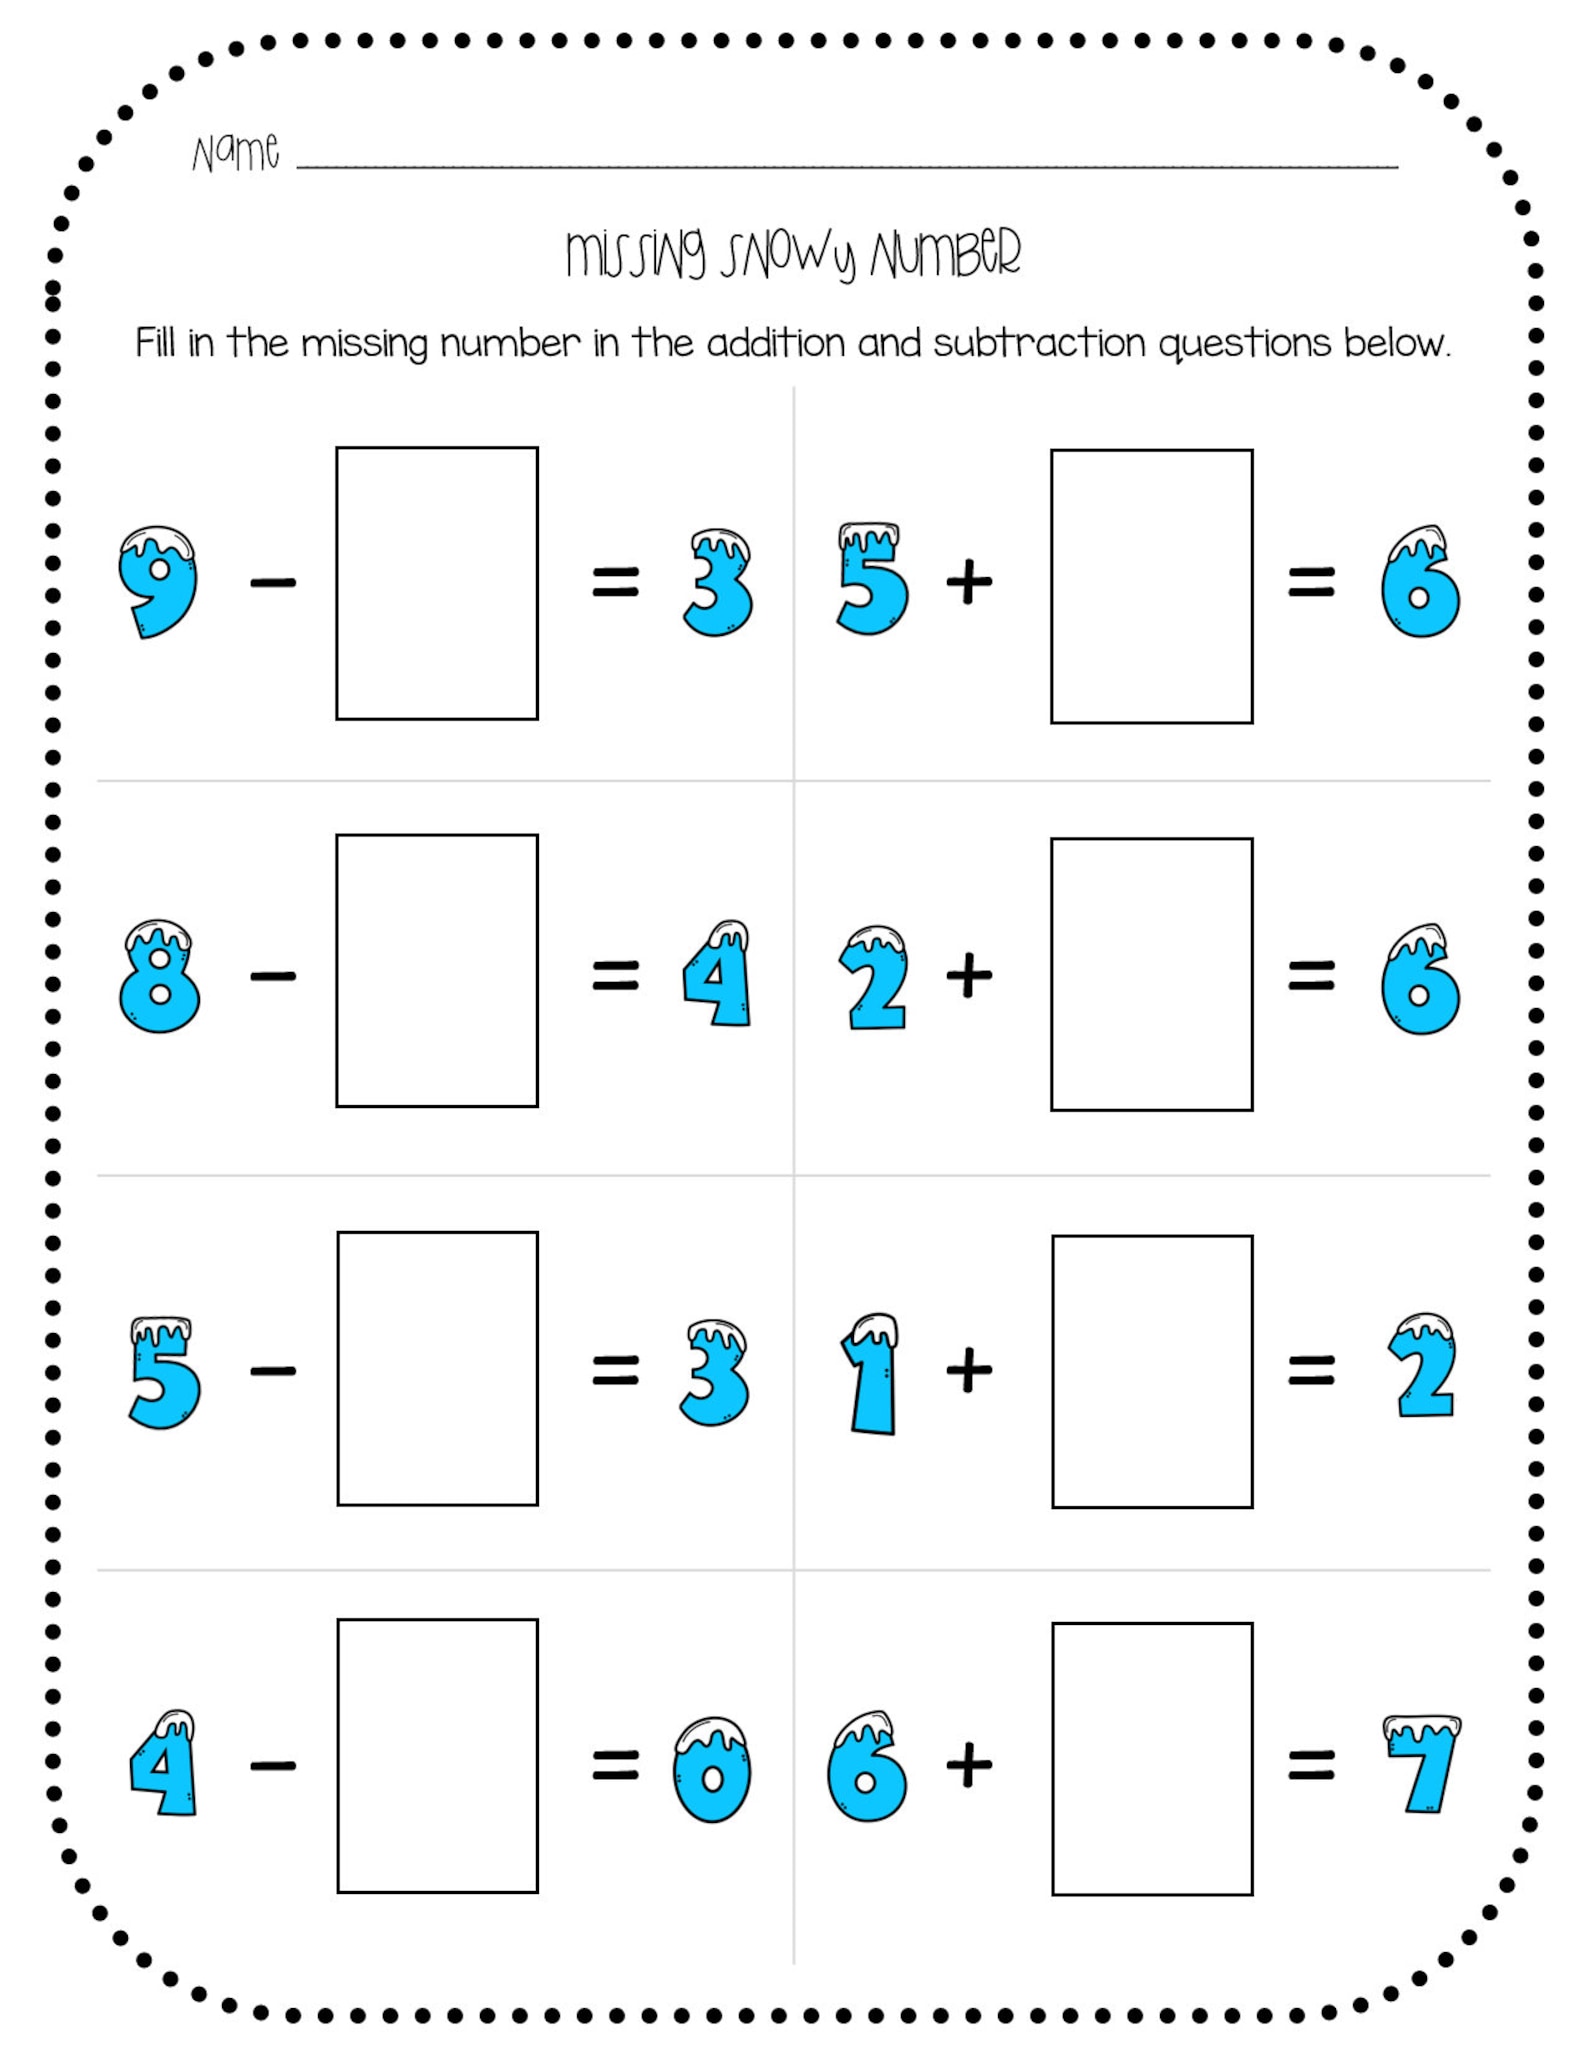 printable-snowy-missing-number-addition-and-subtraction-etsy